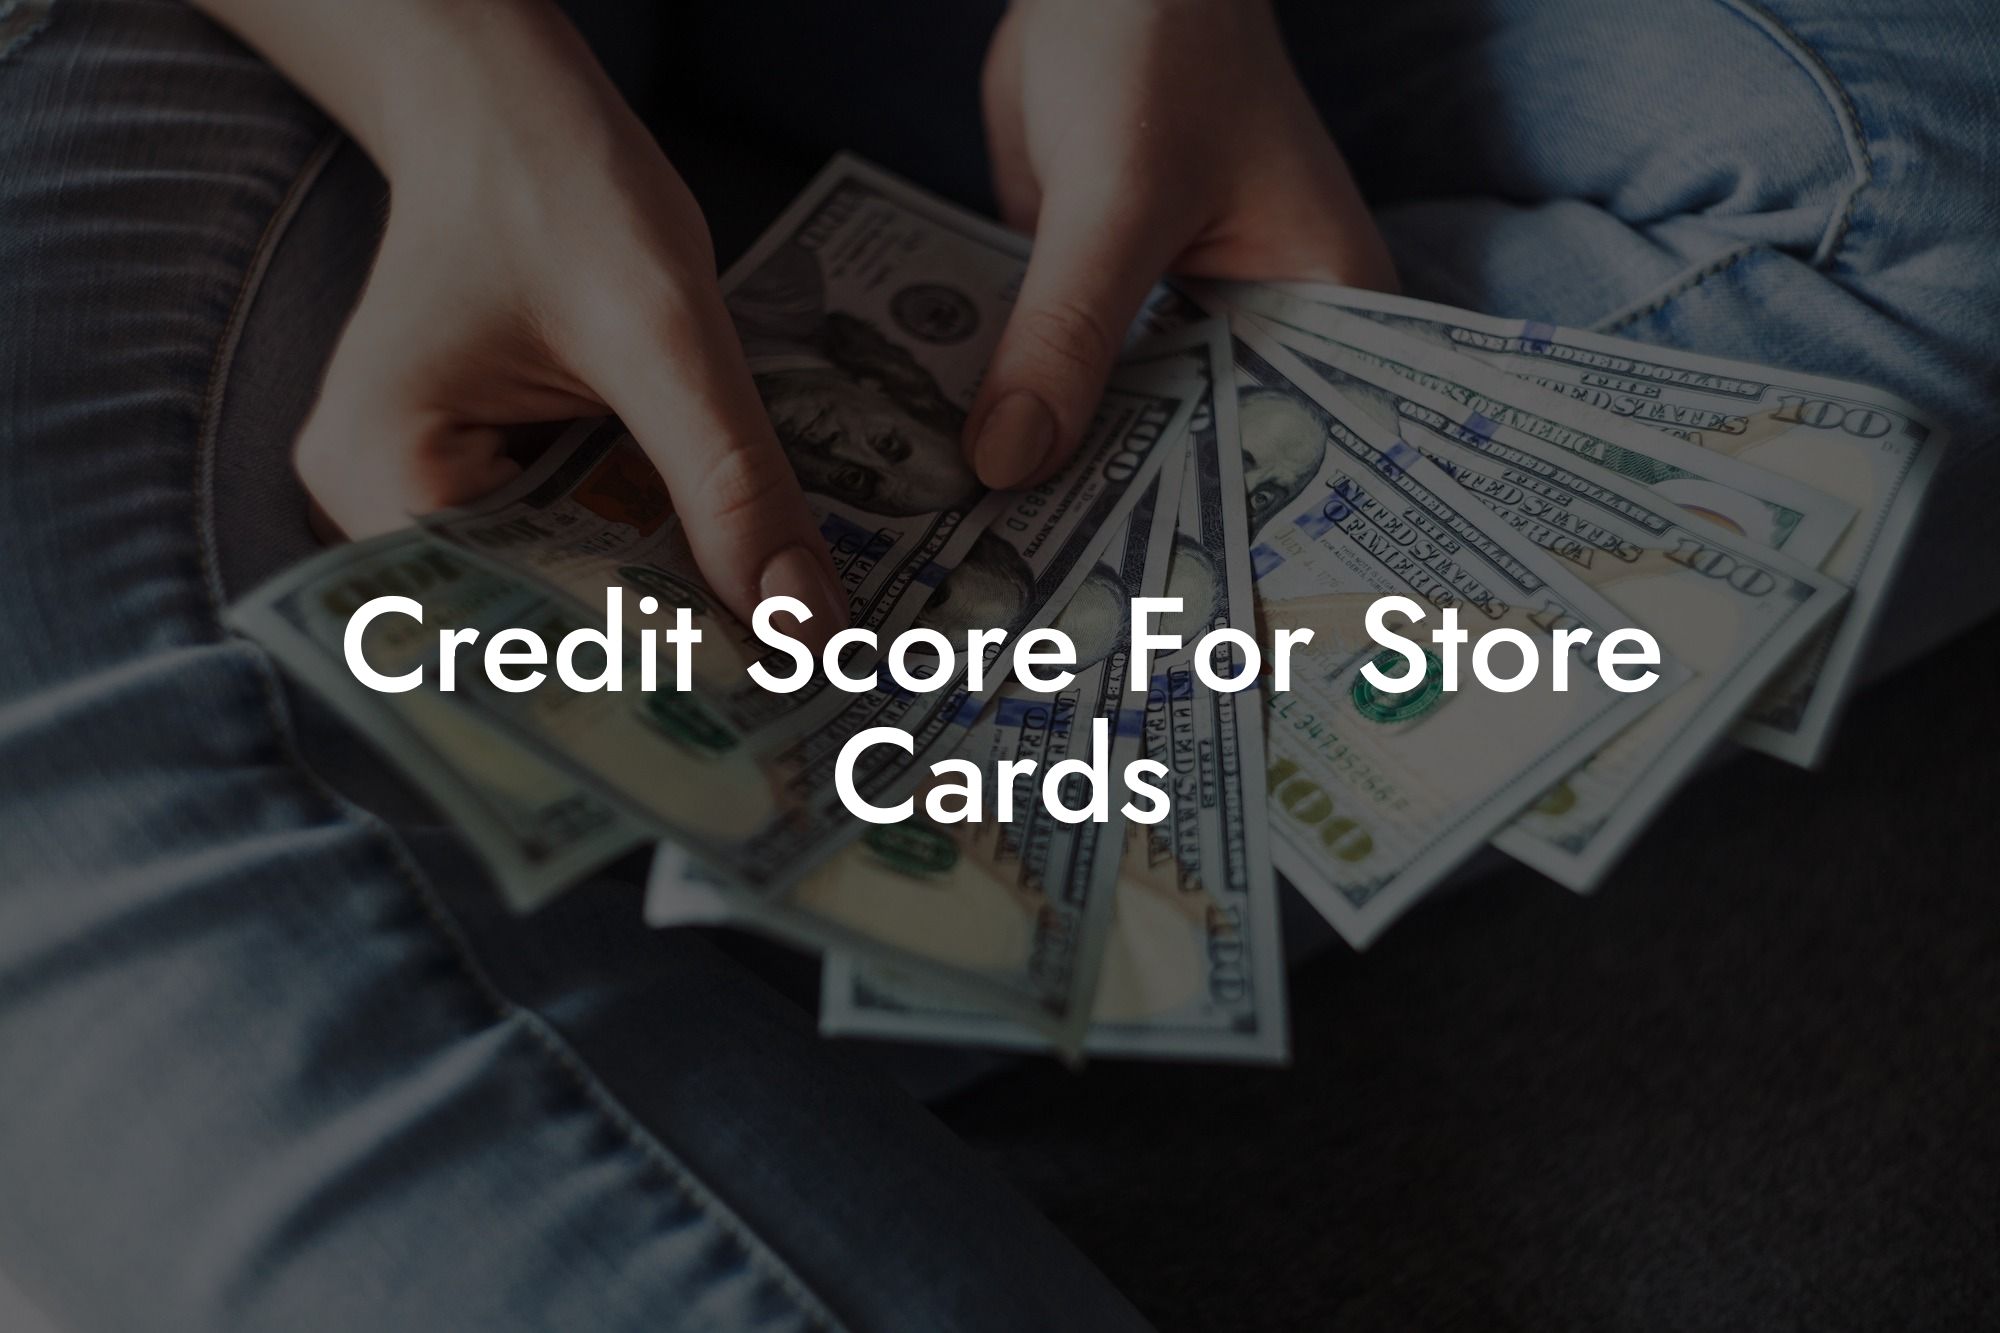 Credit Score For Store Cards